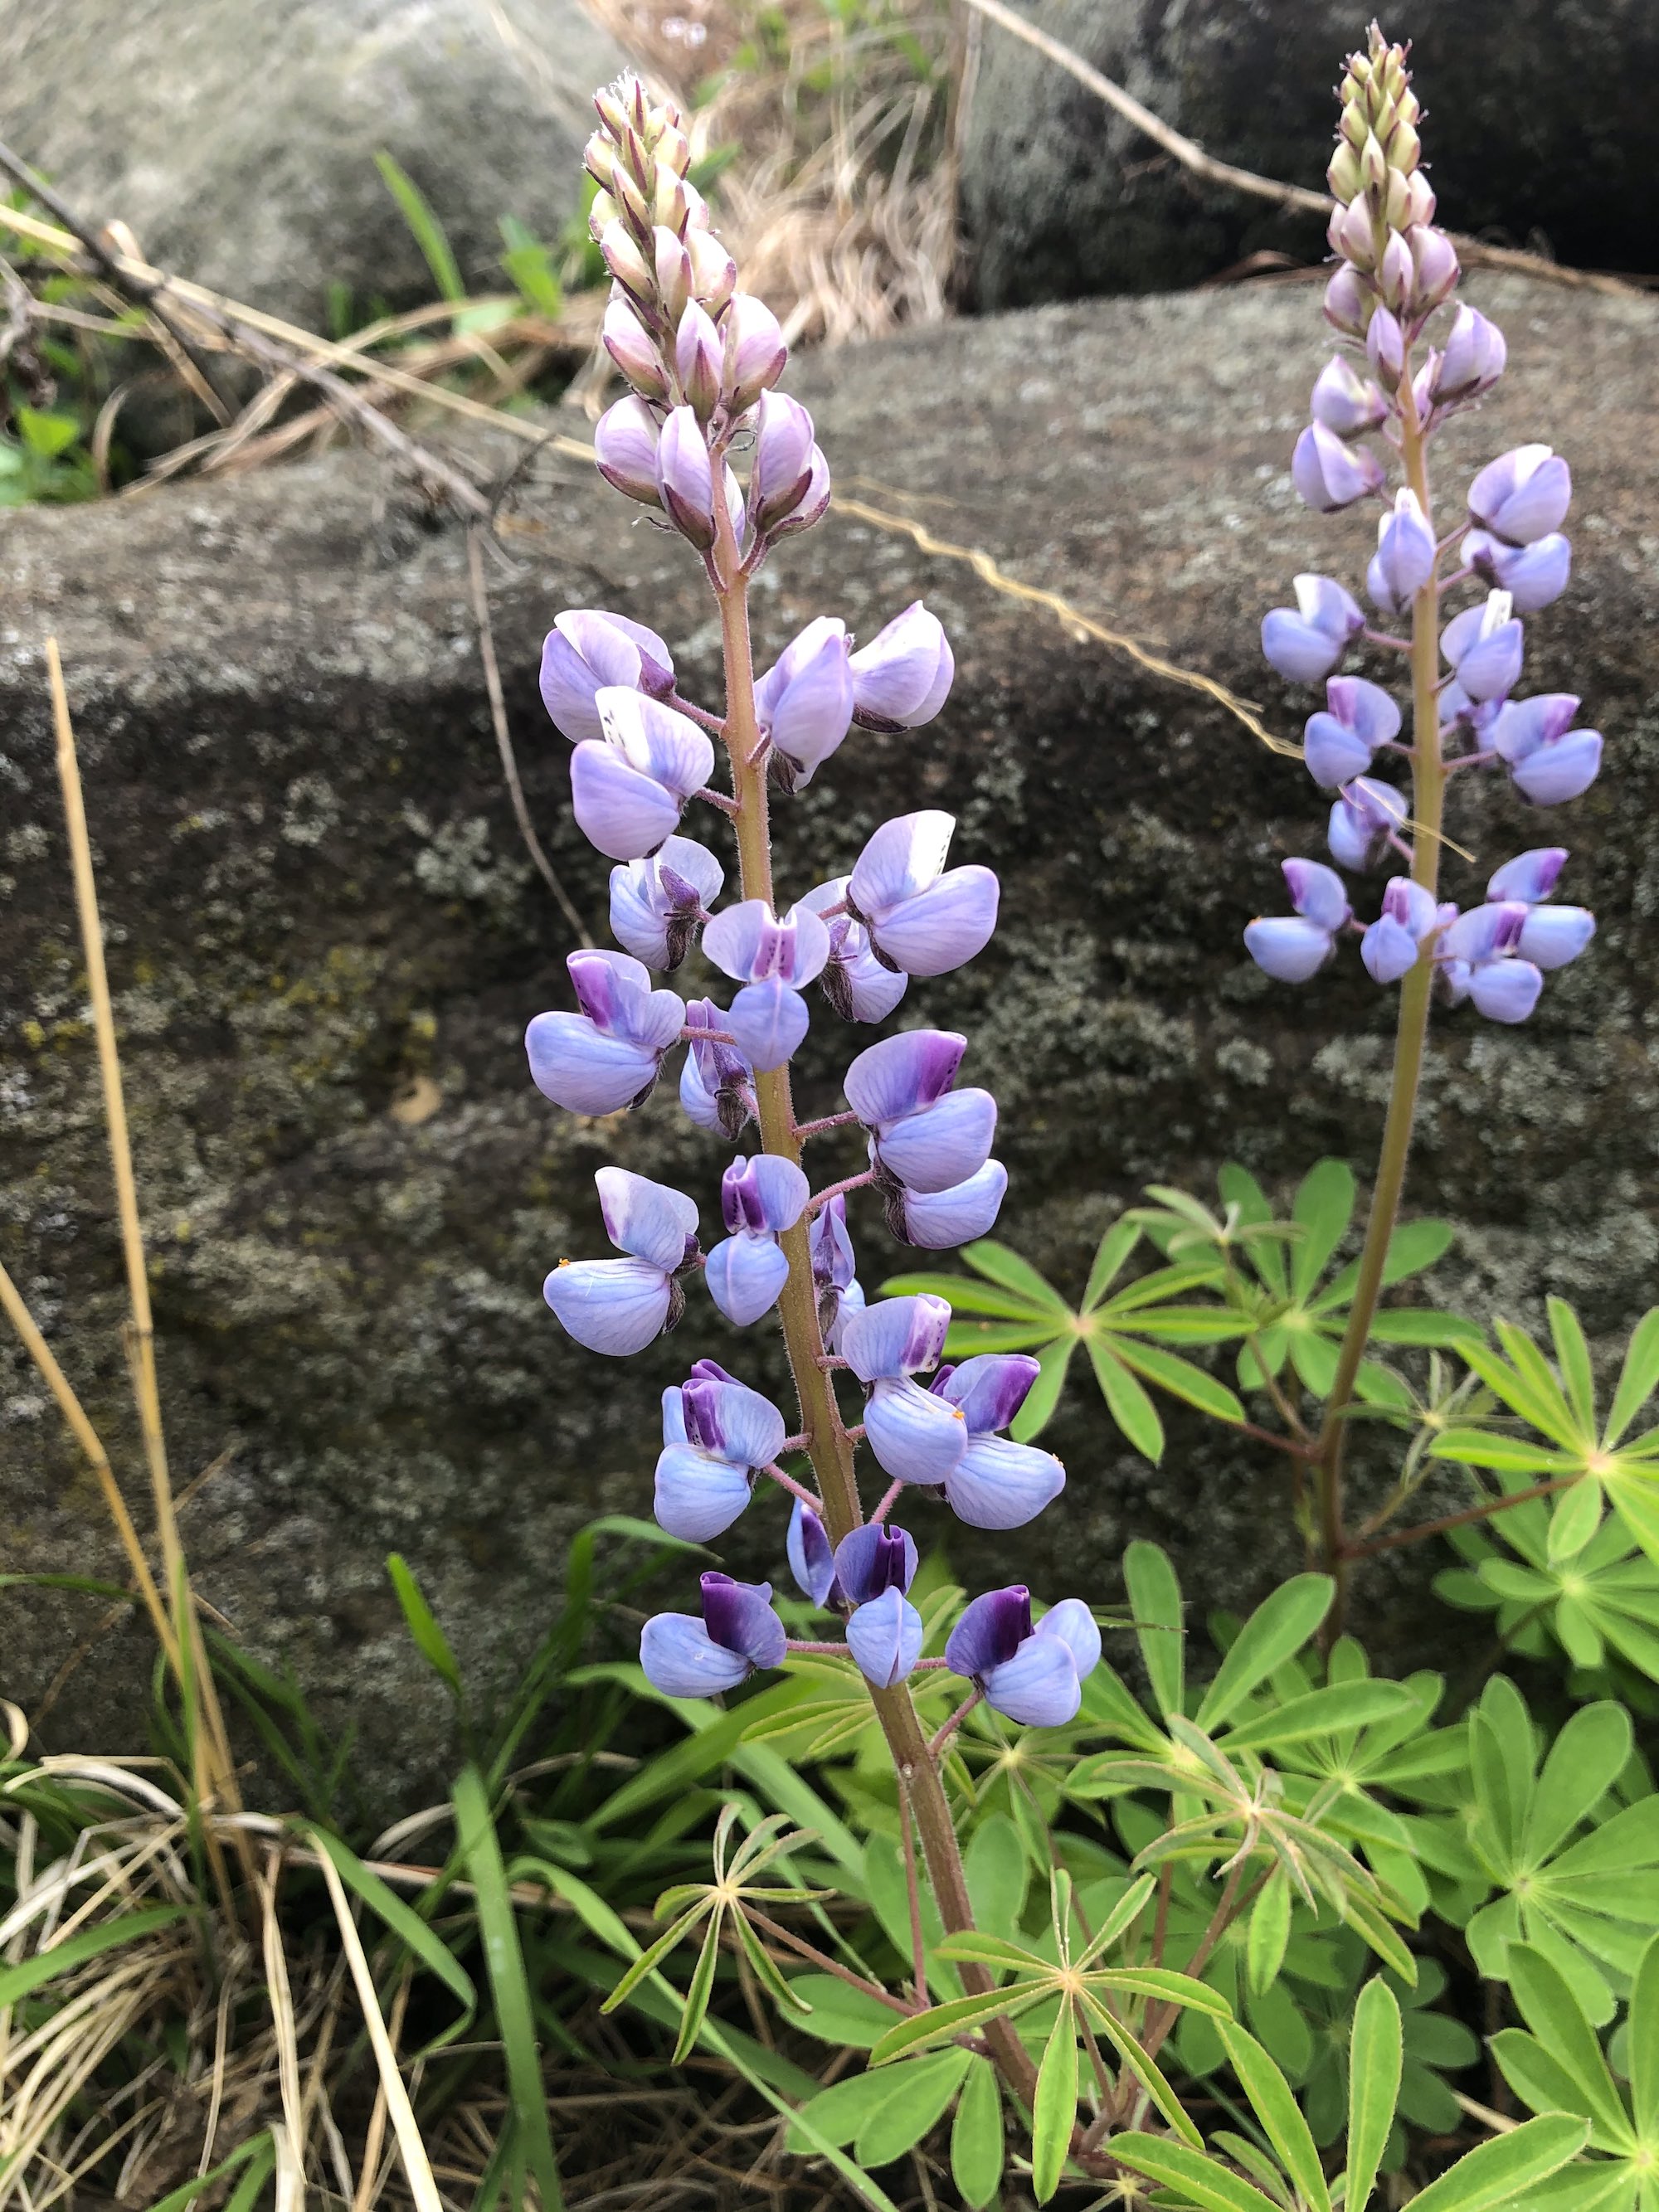 Wild Lupine next to the UW-Madison Arboretum Visitor Center in Madison, Wisconsin on May 15, 2021.